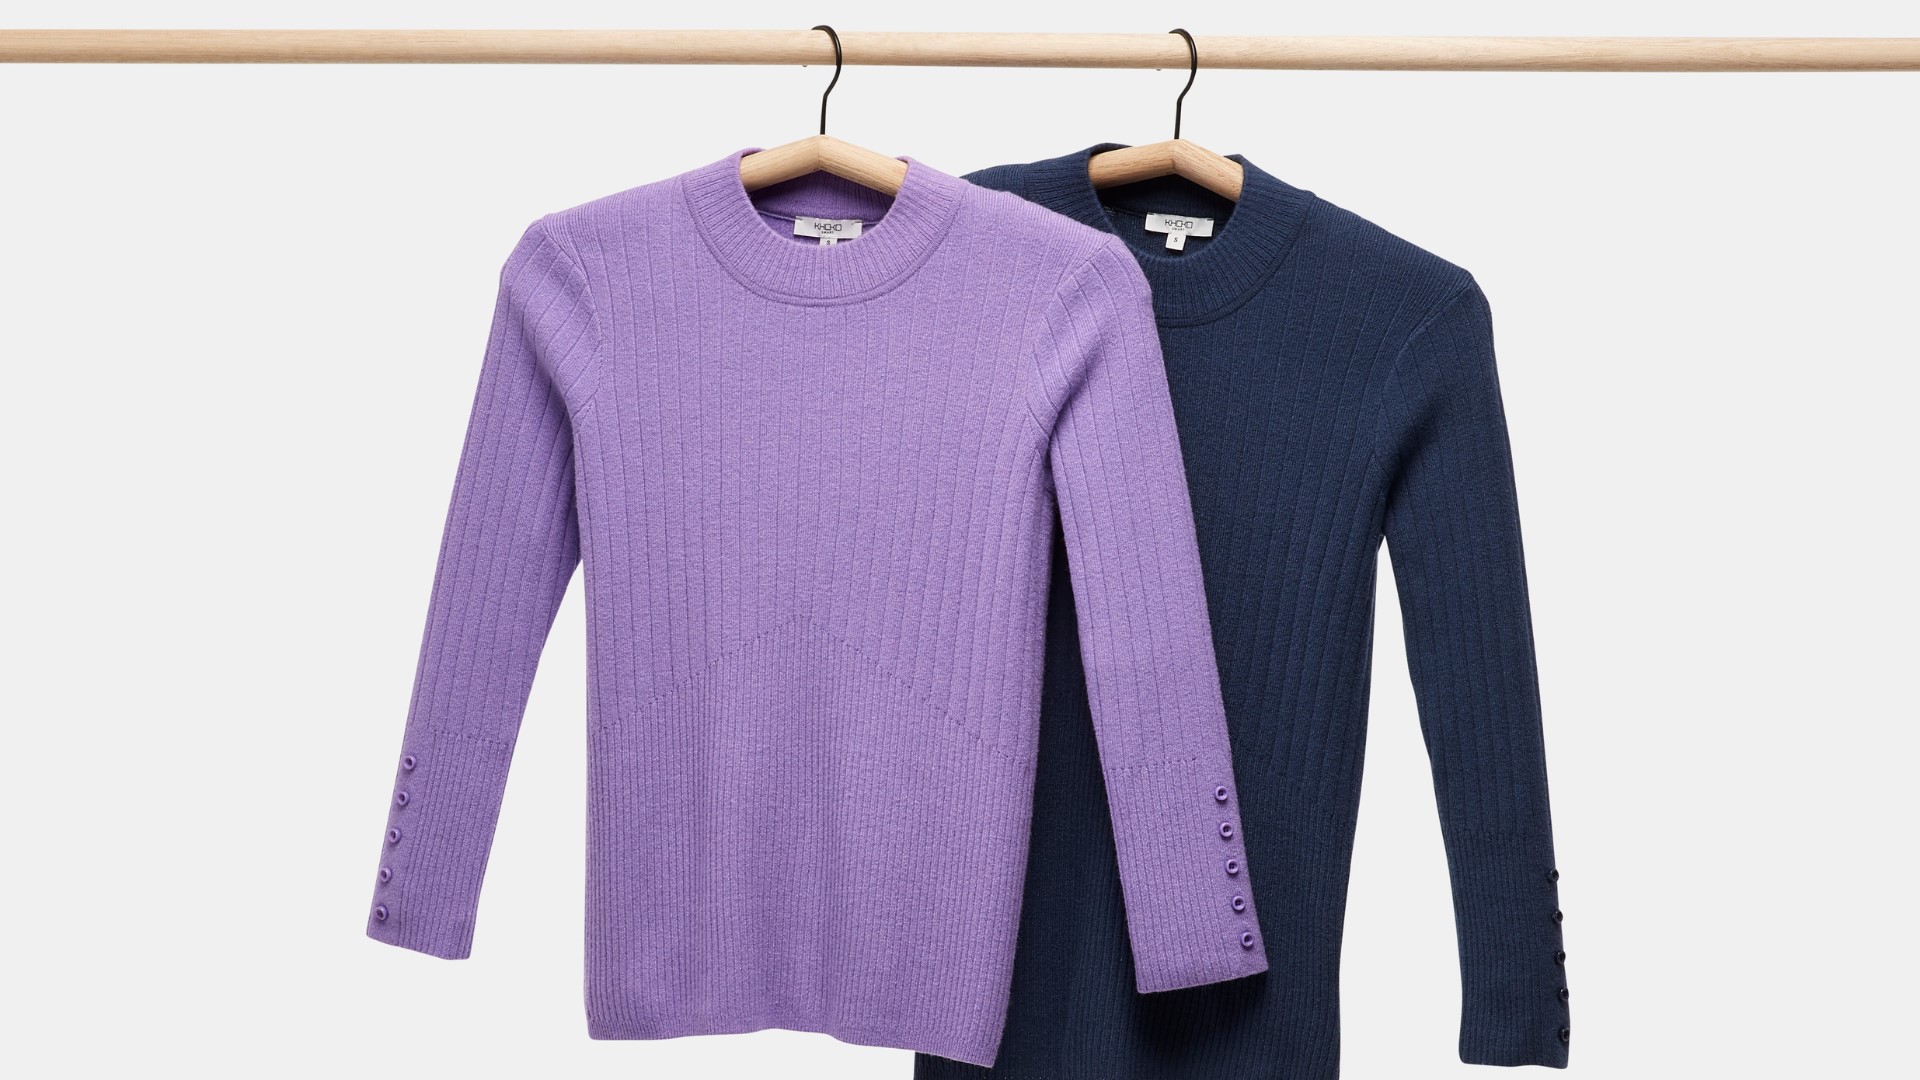 How To Store Sweaters and Jumpers + More Winter Clothes Storage Ideas